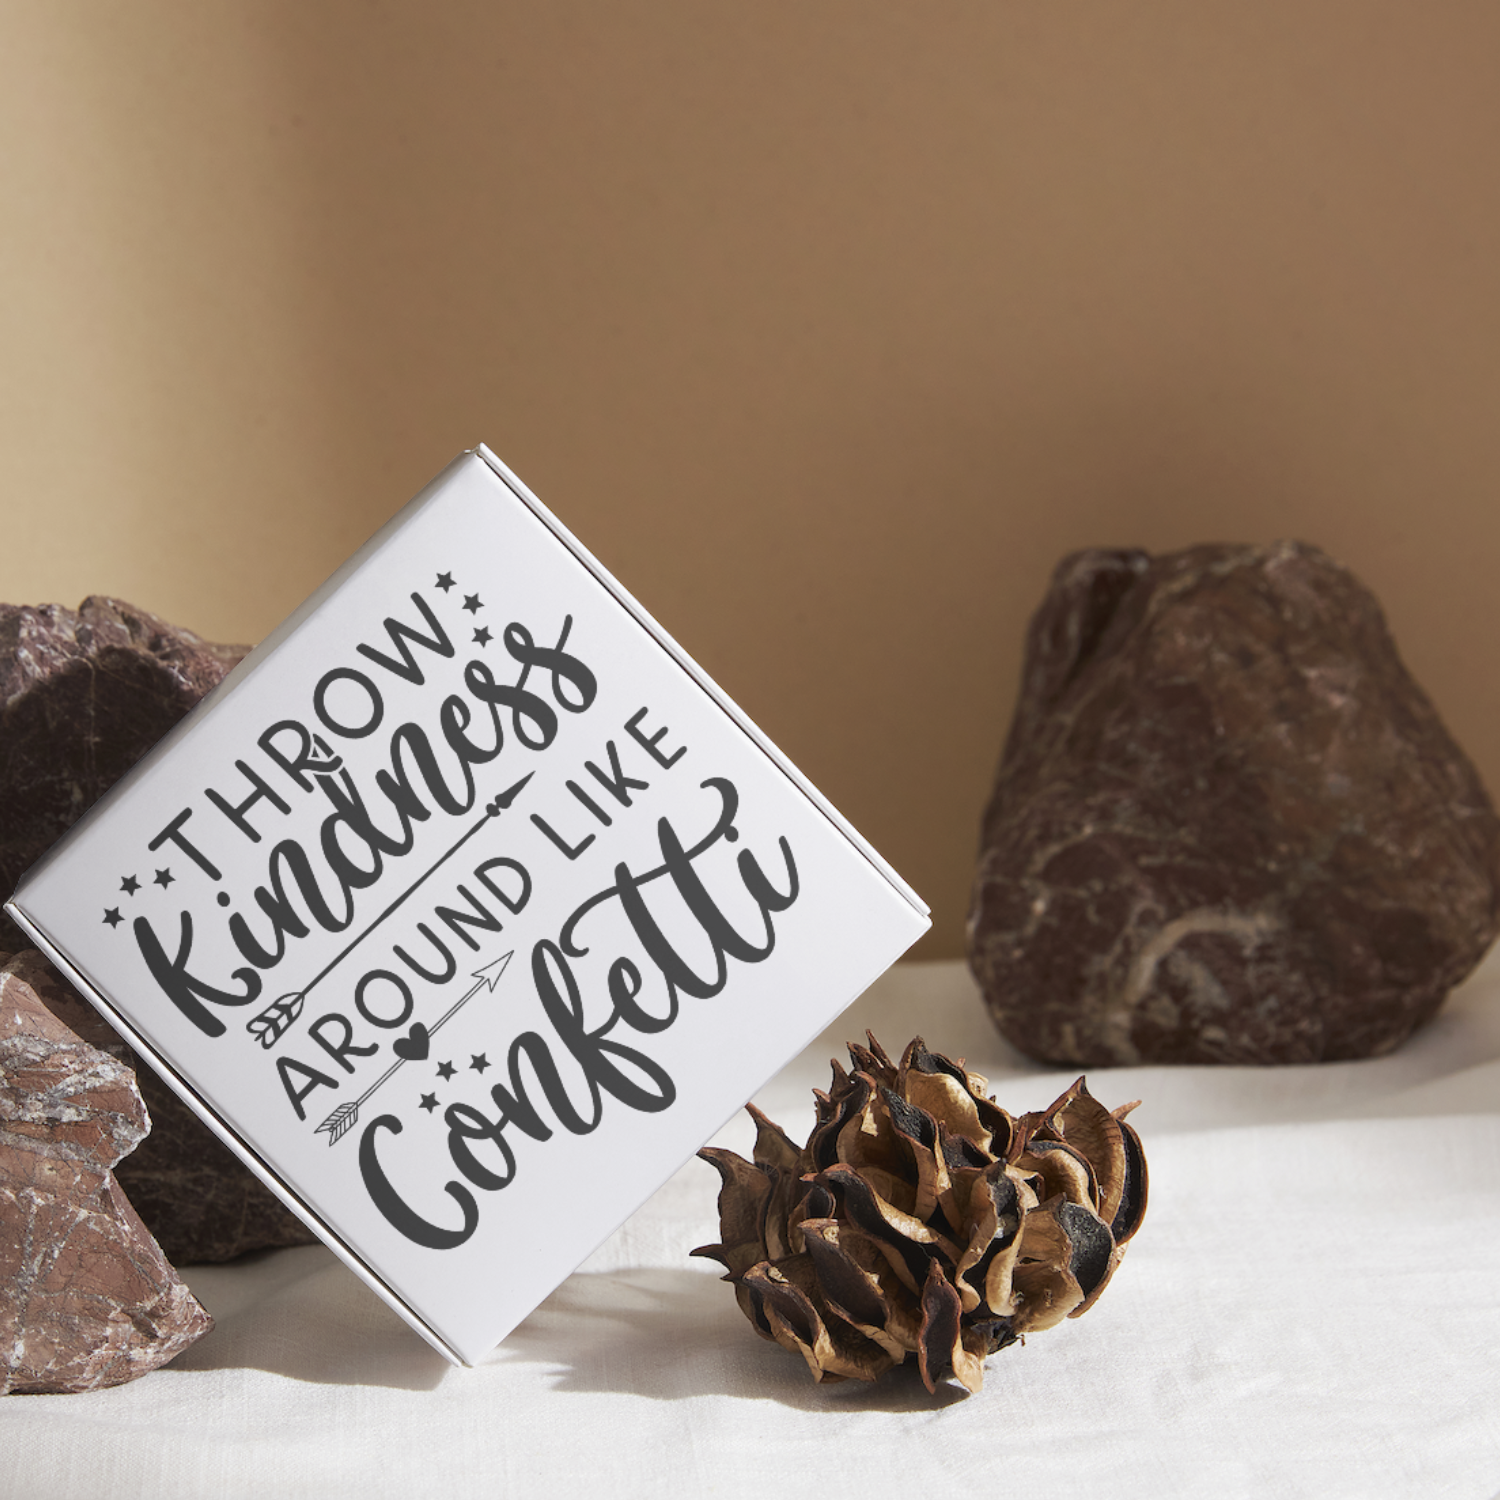 Throw Kindness Around Like Confetti SVG | Digital Download | Cut File | SVG - Only The Sweet Stuff